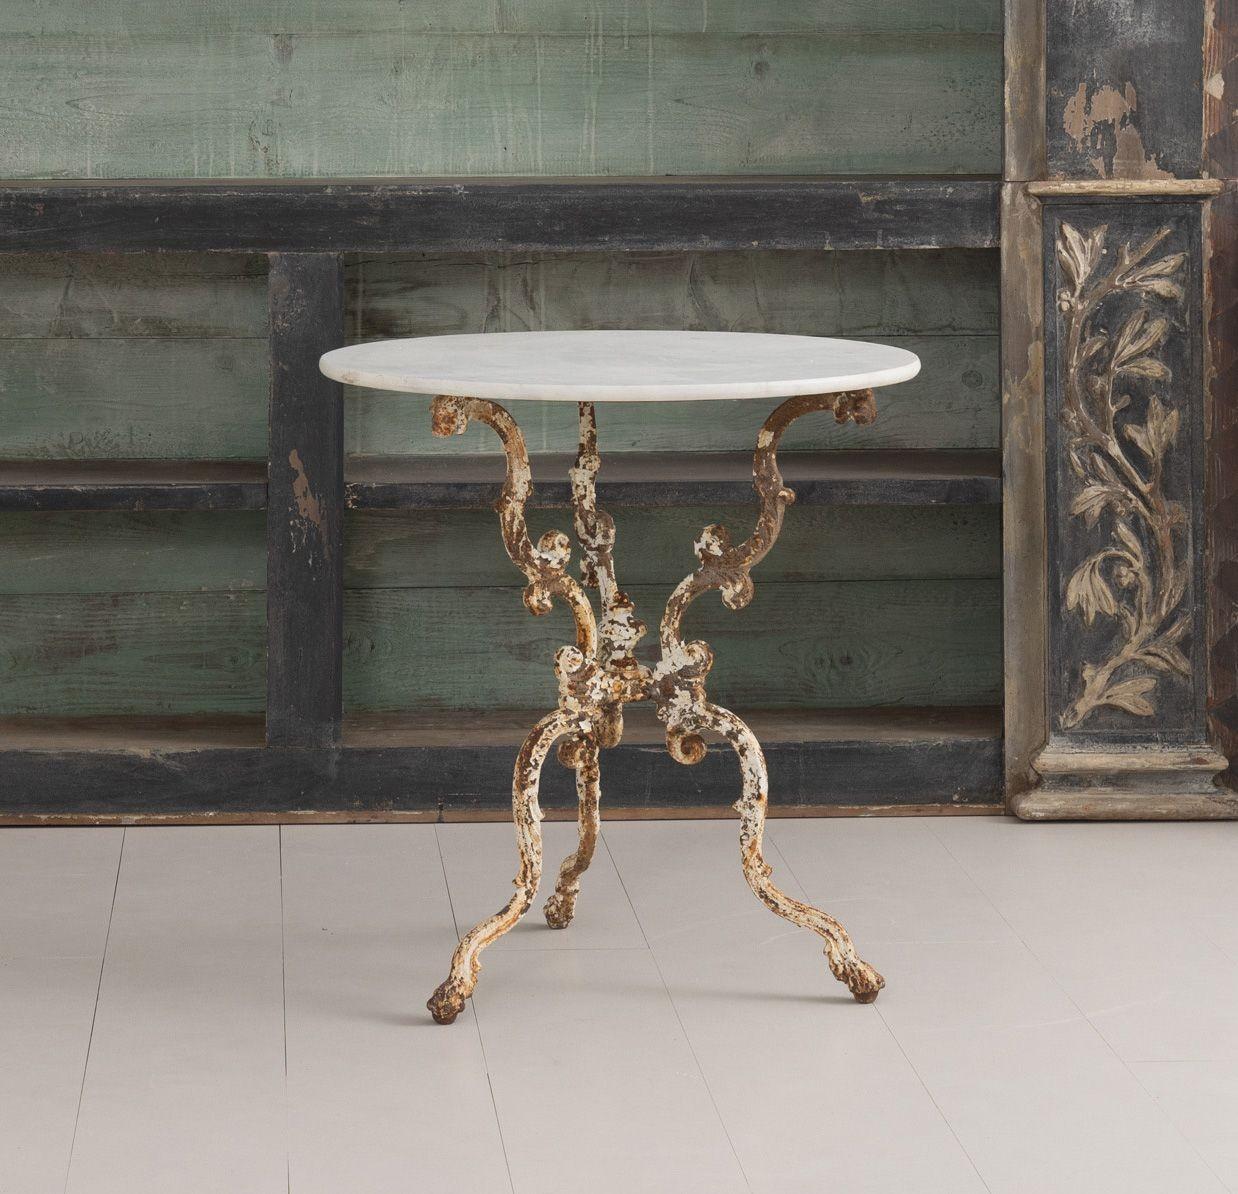 This French cast iron pedestal table has retained its original ivory white painted finish and features a decorative tripod base. The original white Carrera marble top is very lovely with soft gray veining. This table is suitable for either the